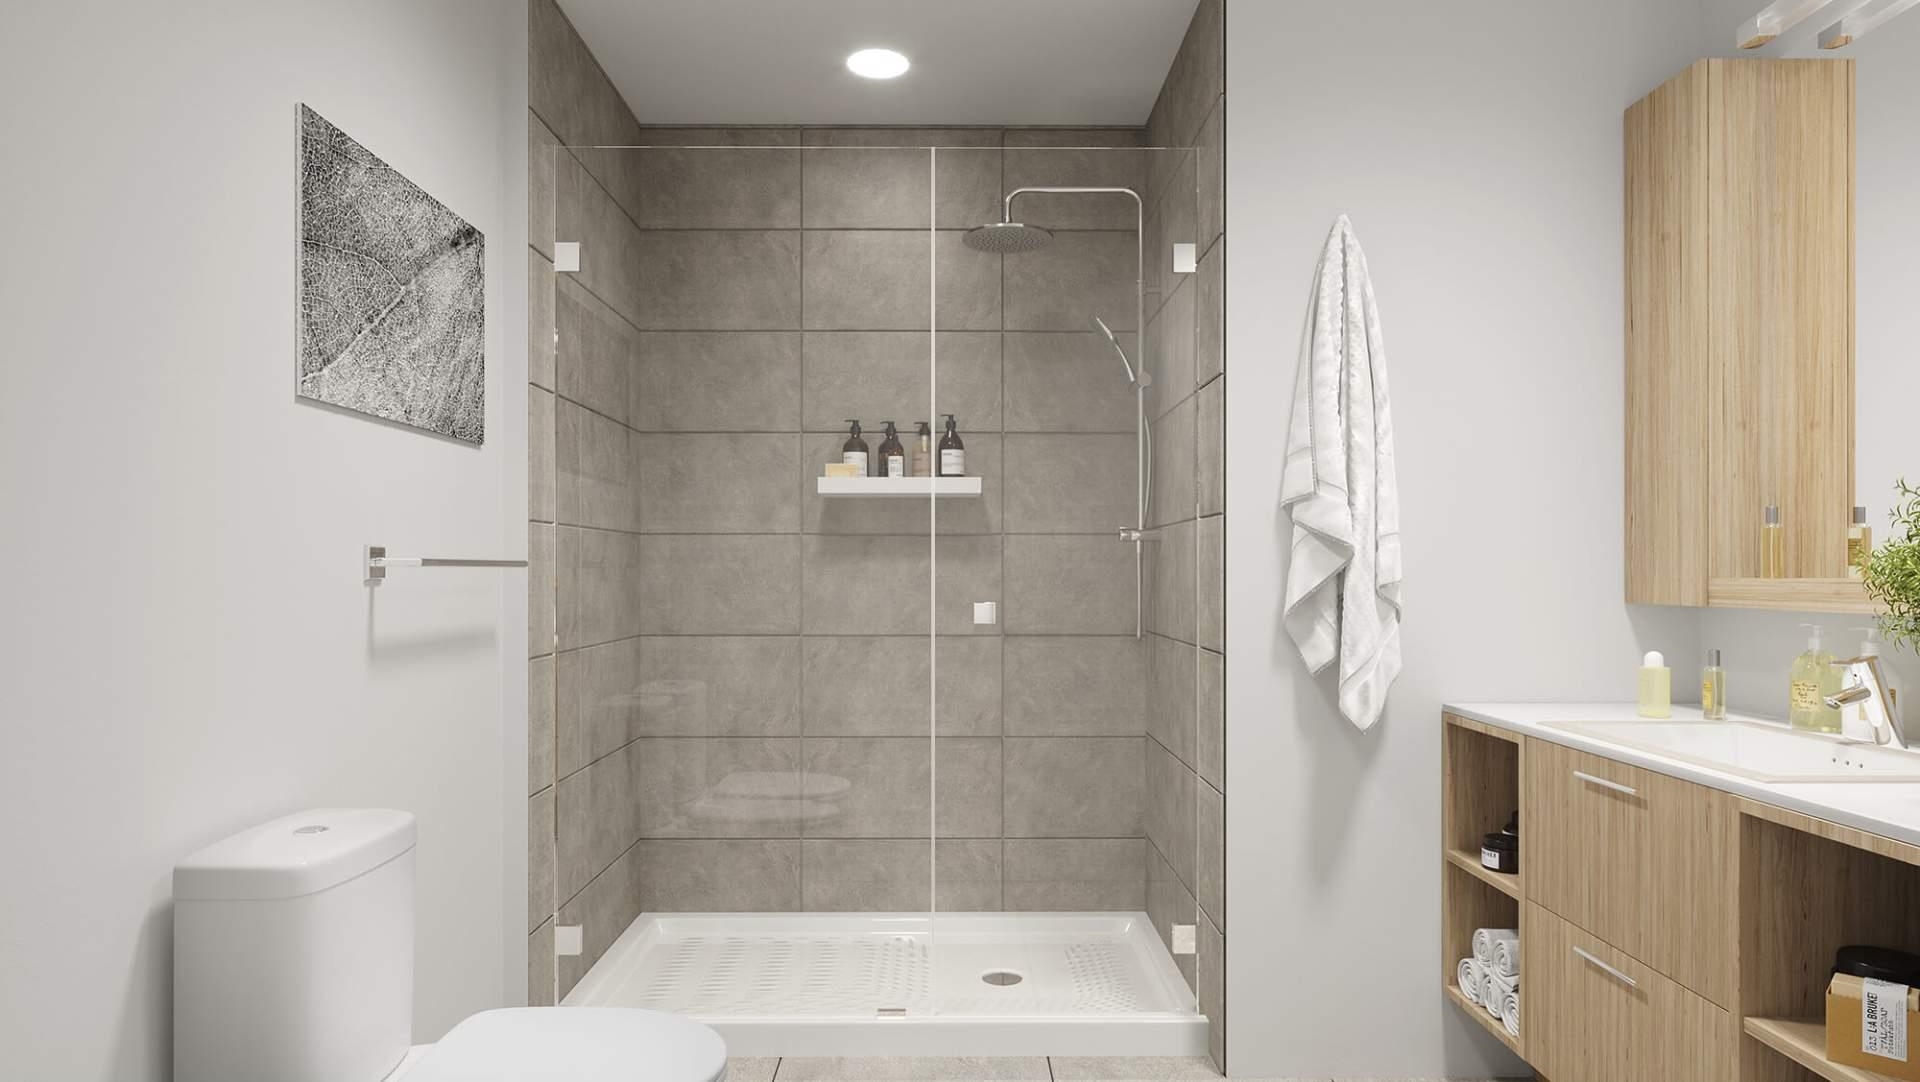 BEAUTIFUL BATHROOMS  Custom floating-look vanity with storage underneath  Modern oversized subway tile in main baths  Chrome Hans Grohe fixtures  Sleek undermounted porcelain sink  Dual flush toilets for improved water consumption